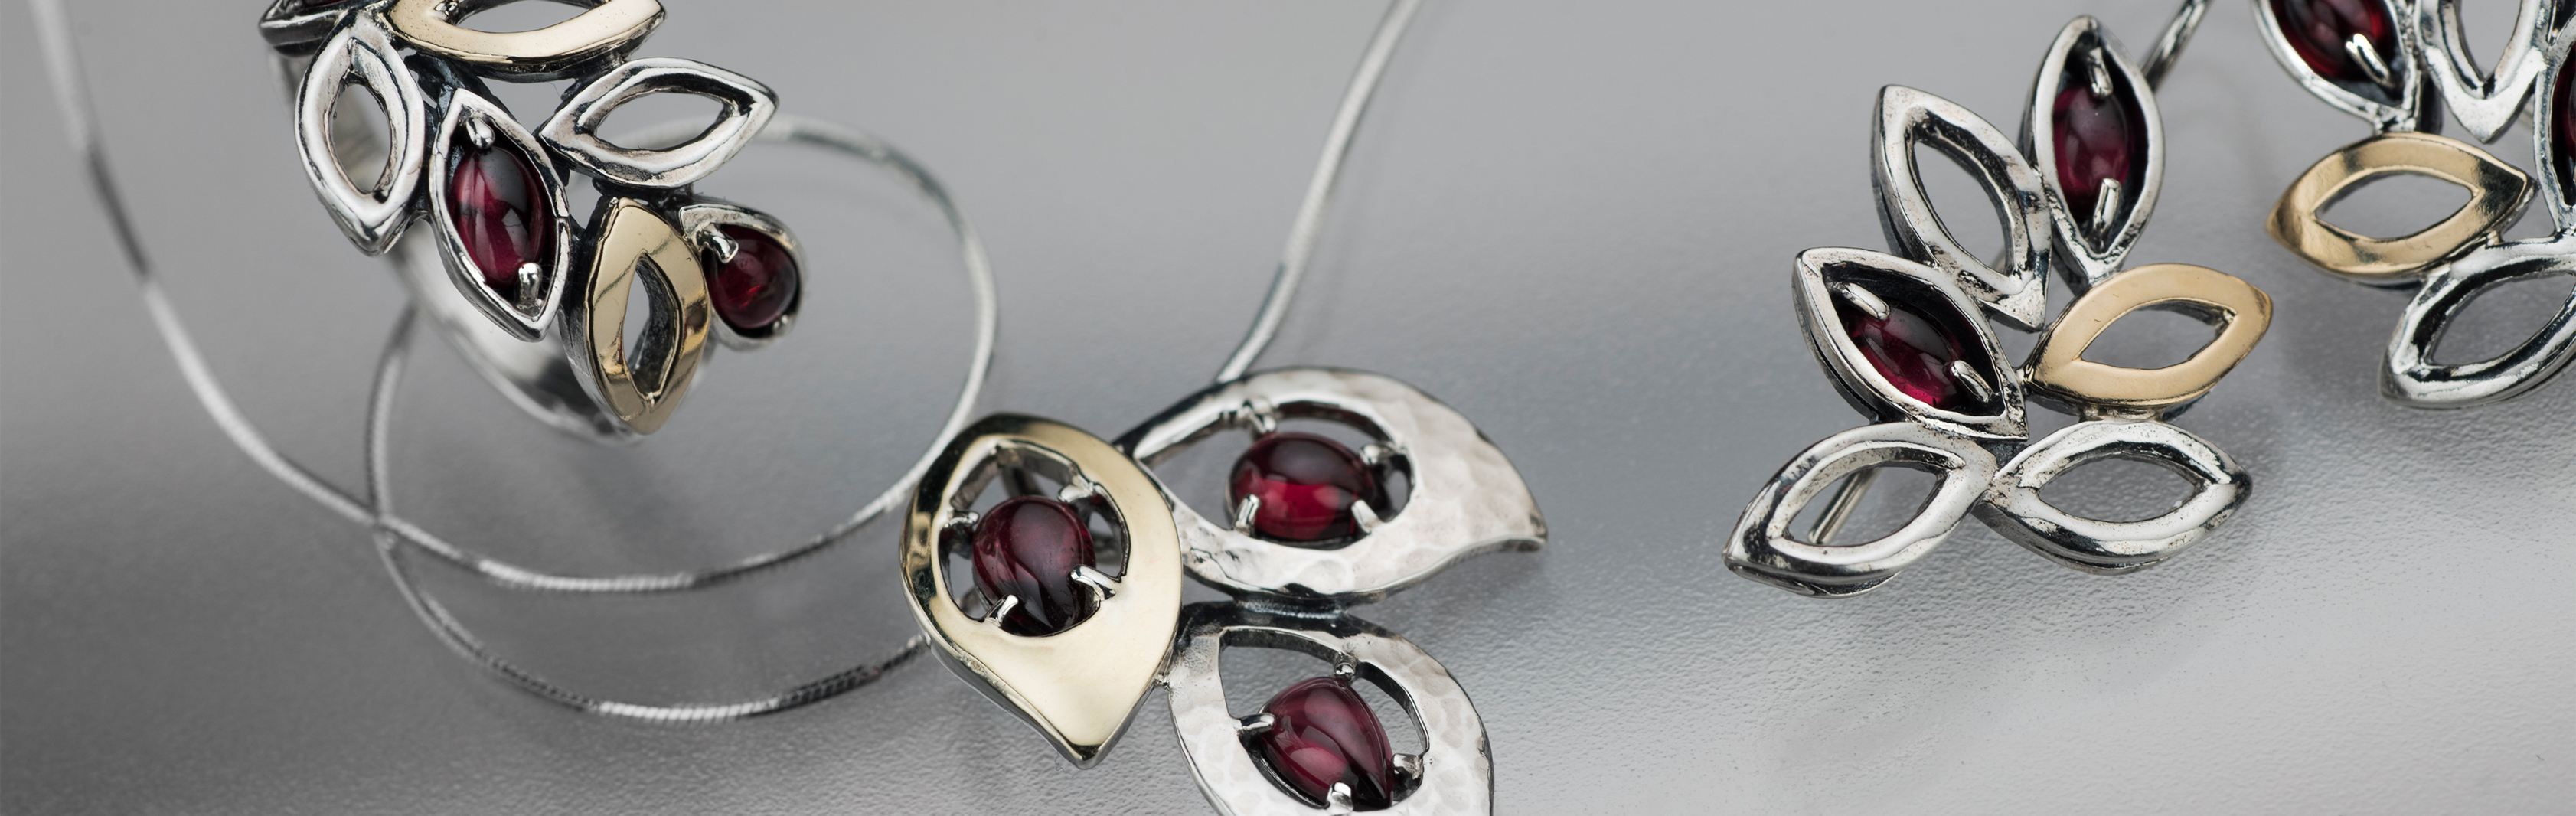 Autumn Leaves Collection | 925 Sterling Silver & 9K Gold Jewelry with Garnet